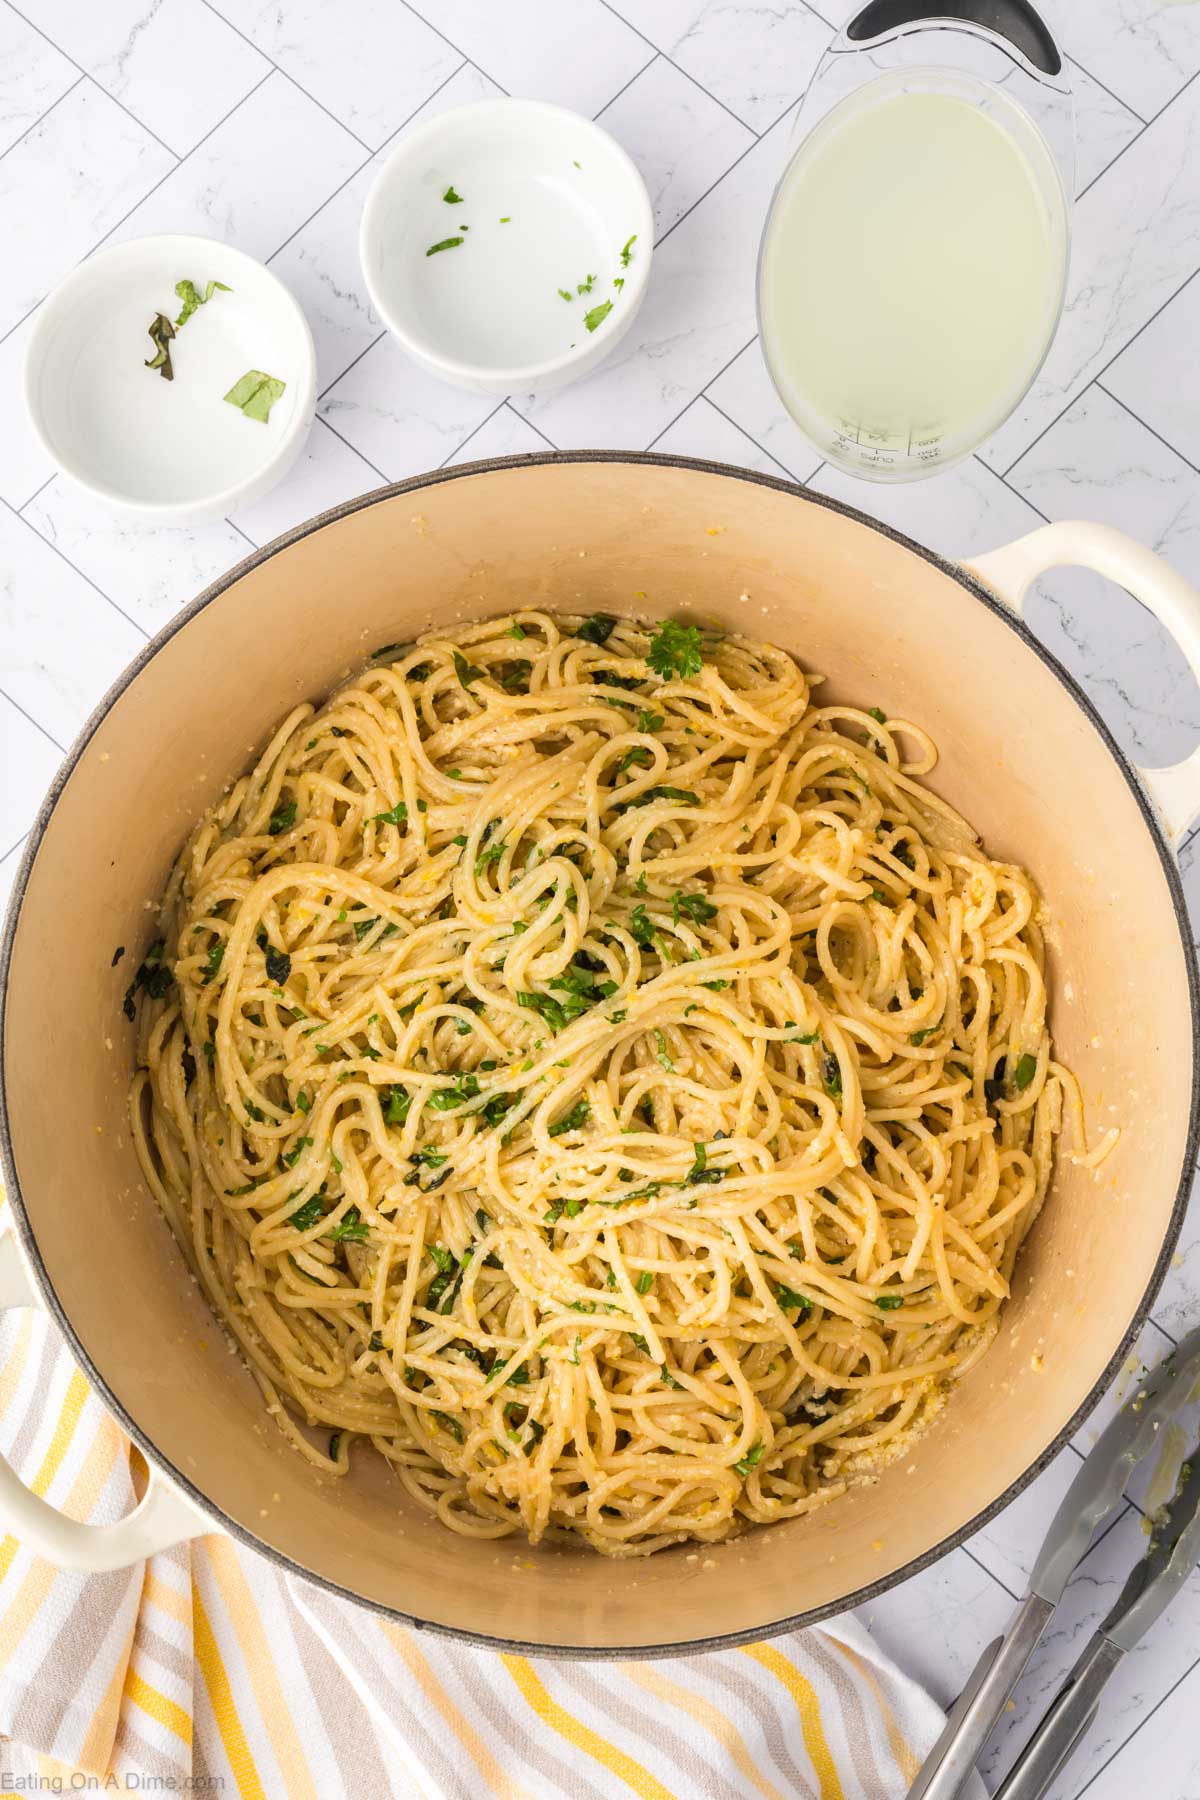 Tossed spaghetti with the lemon mixture and fresh herbs